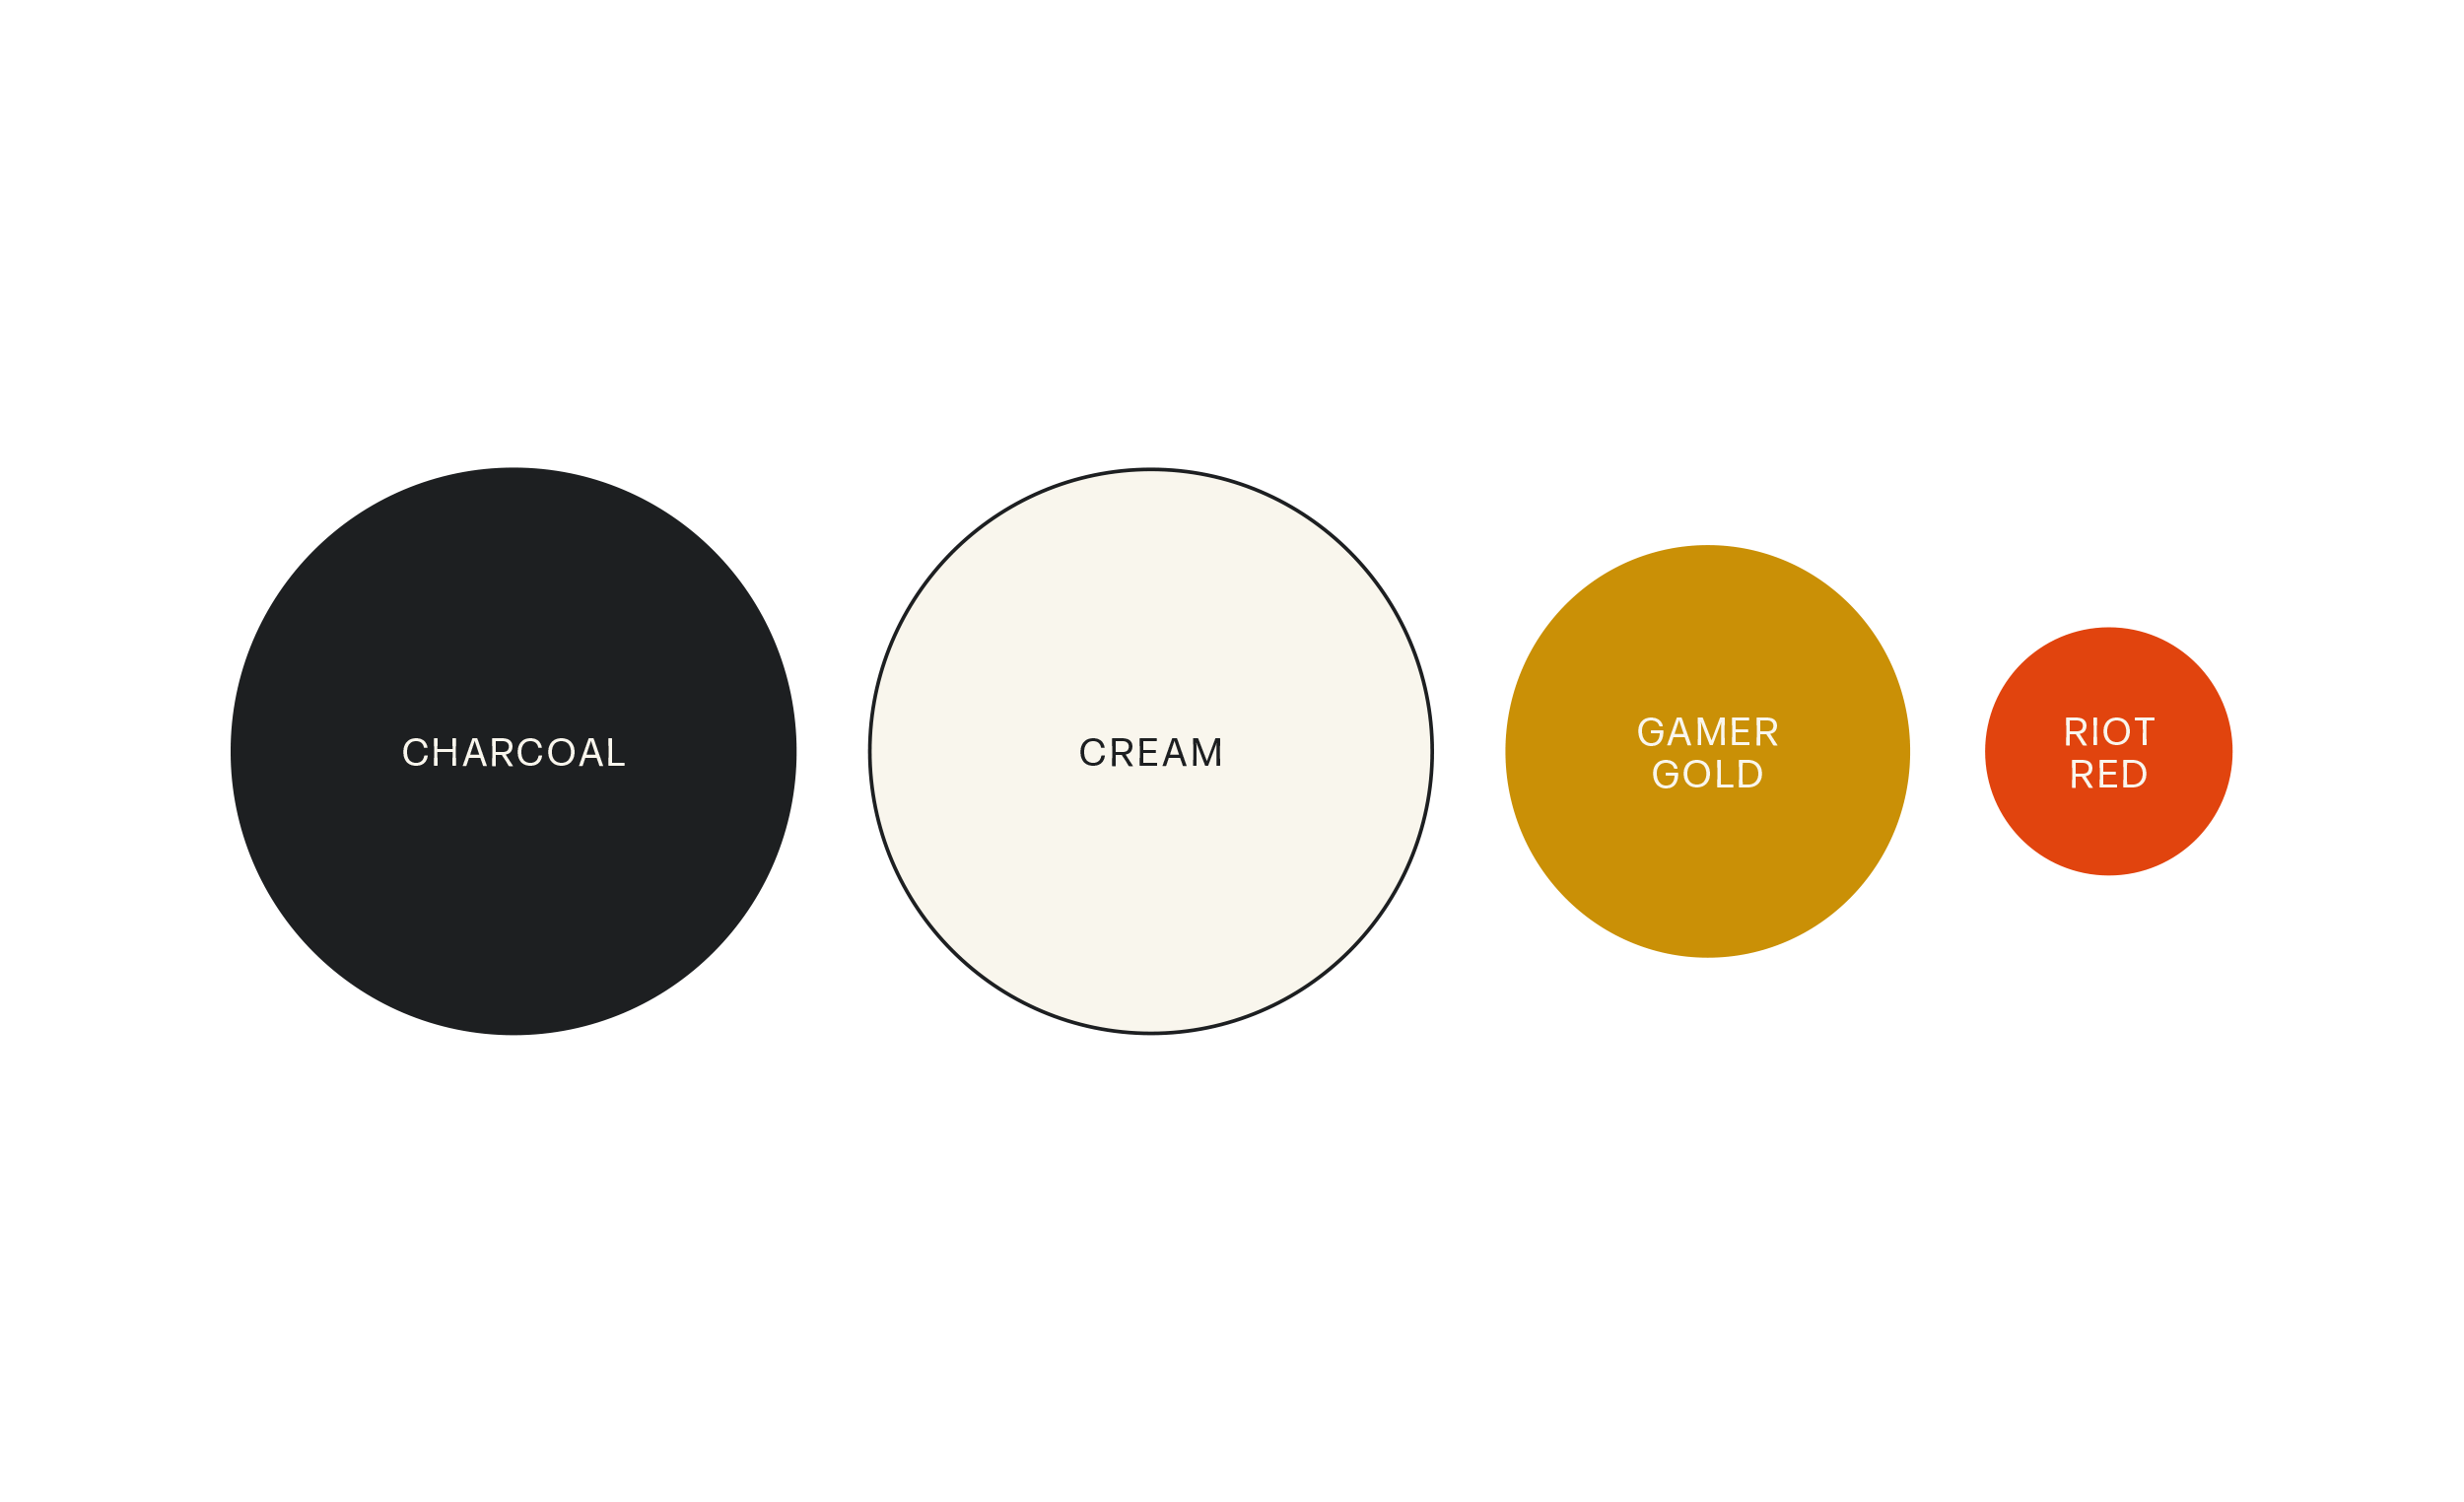 GMG Brand Colors laid out in a line of circles consisting of Charcoal, Cream, Gamer Gold, and Riot Red.